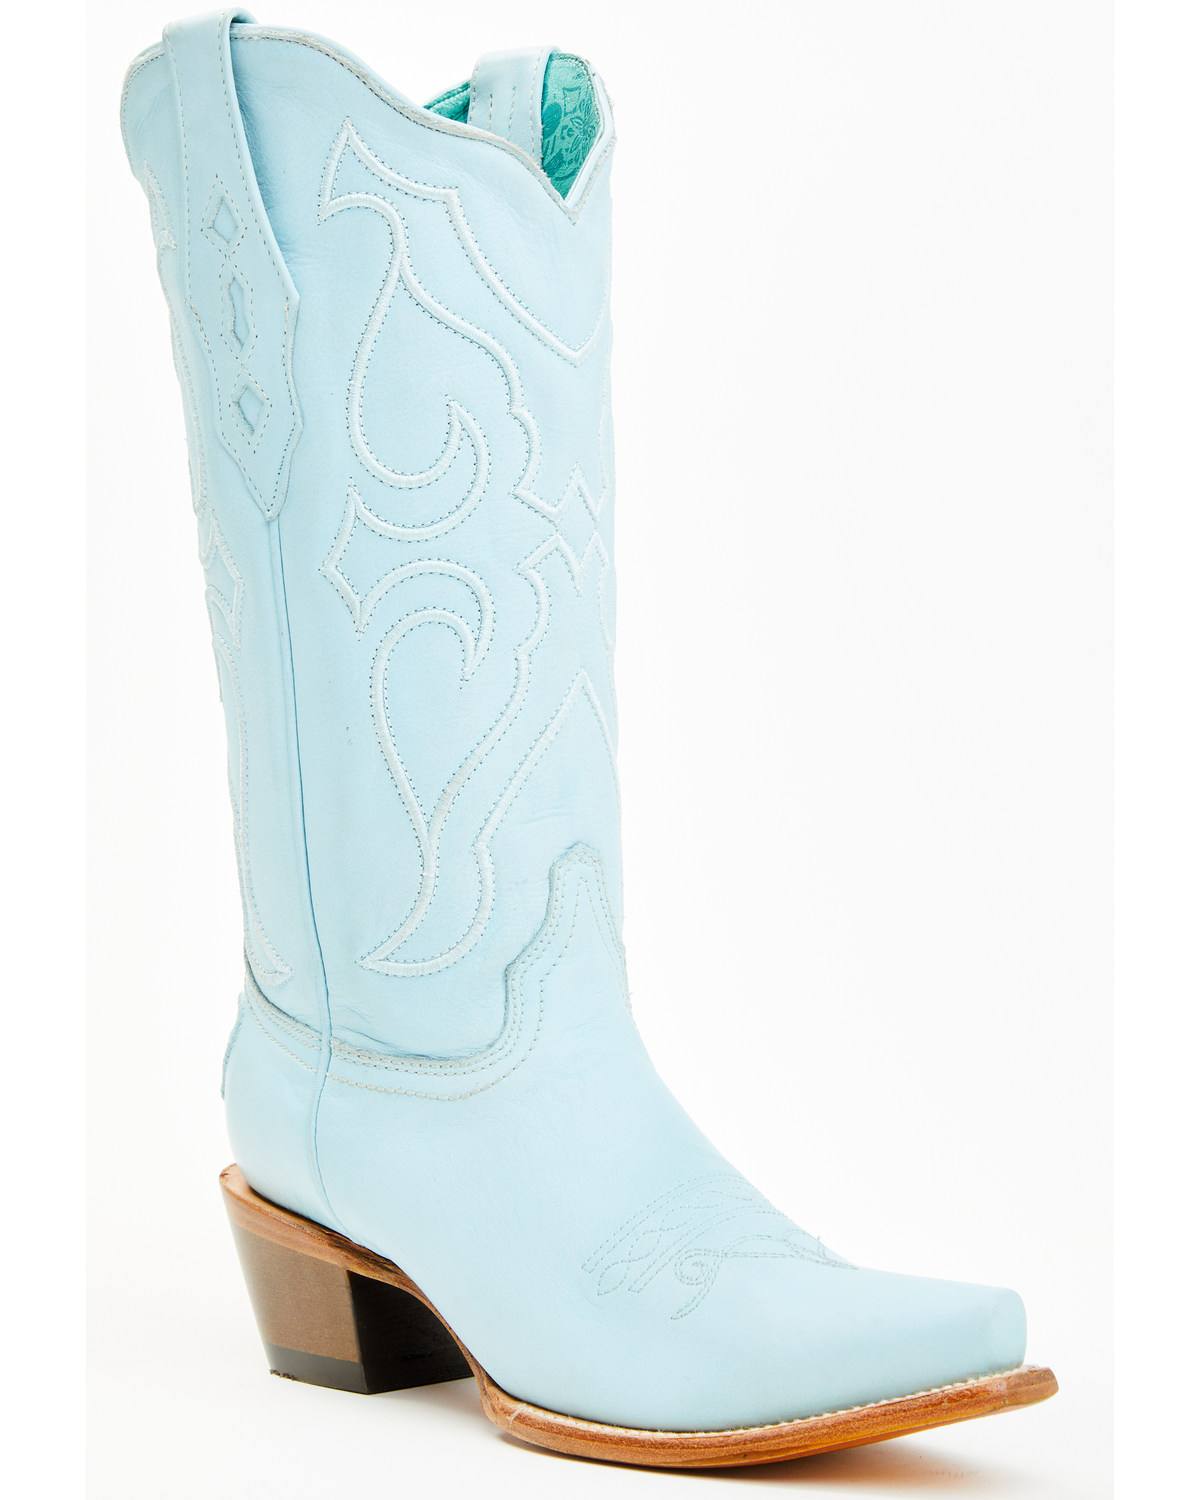 Corral Women's Western Boots - Snip Toe